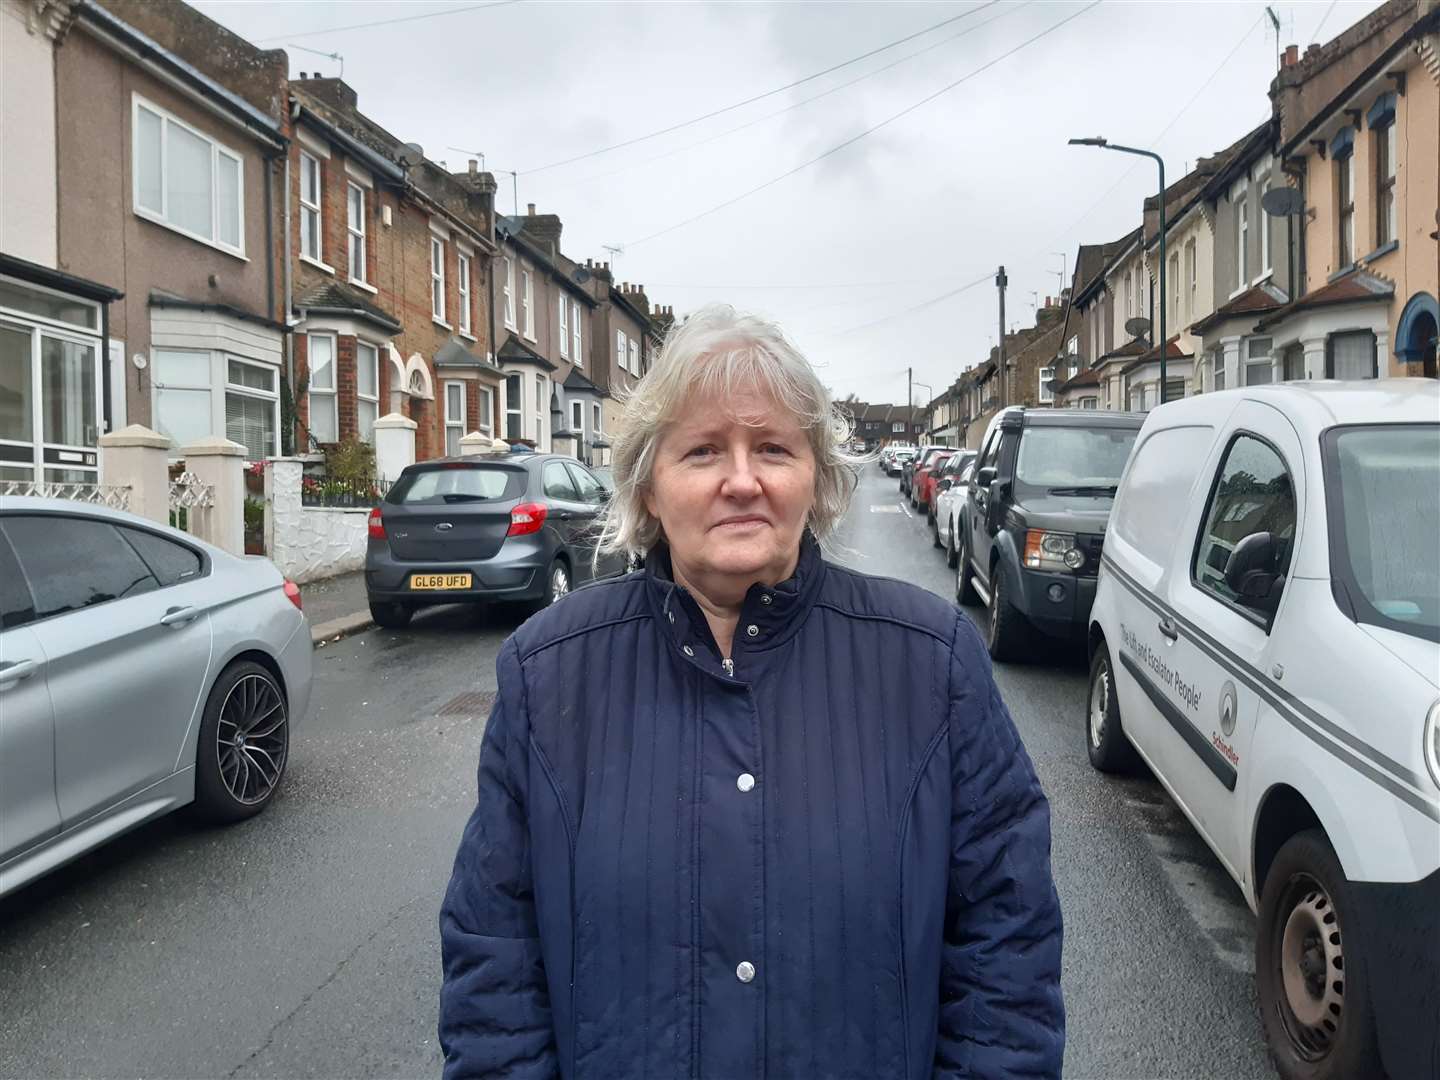 Cllr Zoë Van Dyke witnessed the 'aggressive' and 'terrorising' incident which took place along Kitchener Road